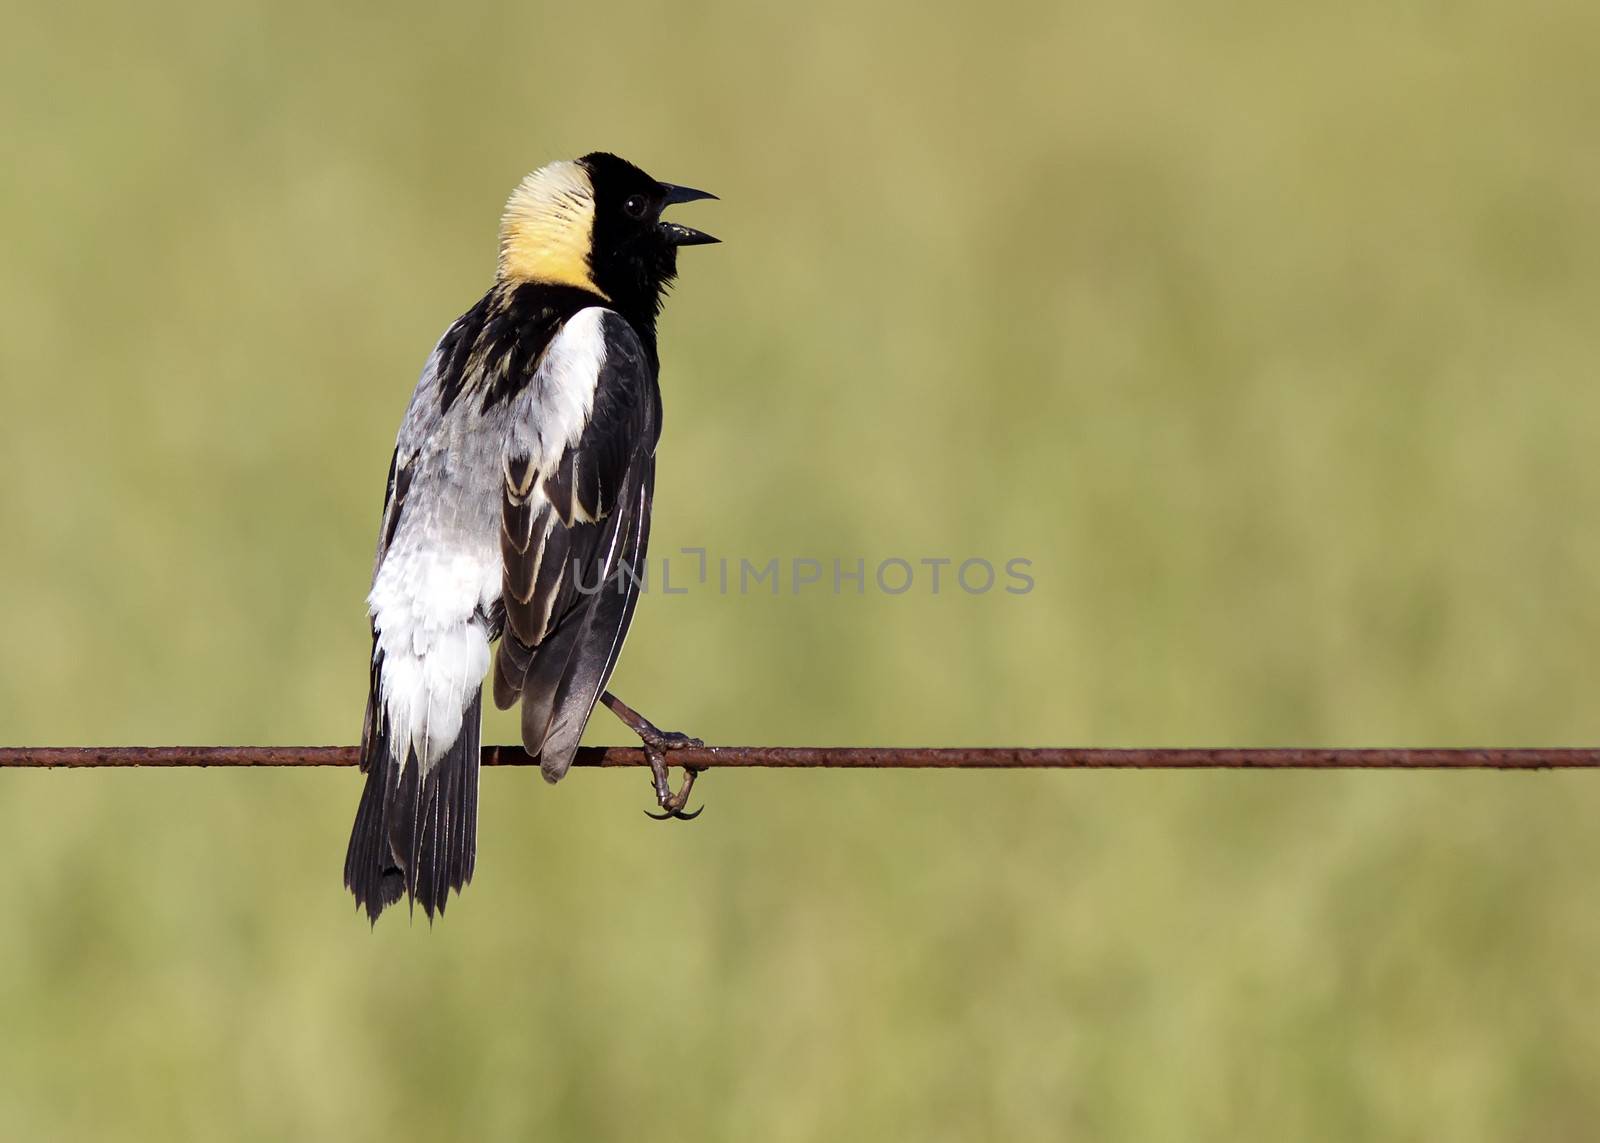 A Bobolink on a wire fence in a grass field,Lancaster County,Pennsylvania.The Bobolink (Dolichonyx oryzivorus) is a small New World blackbird.
